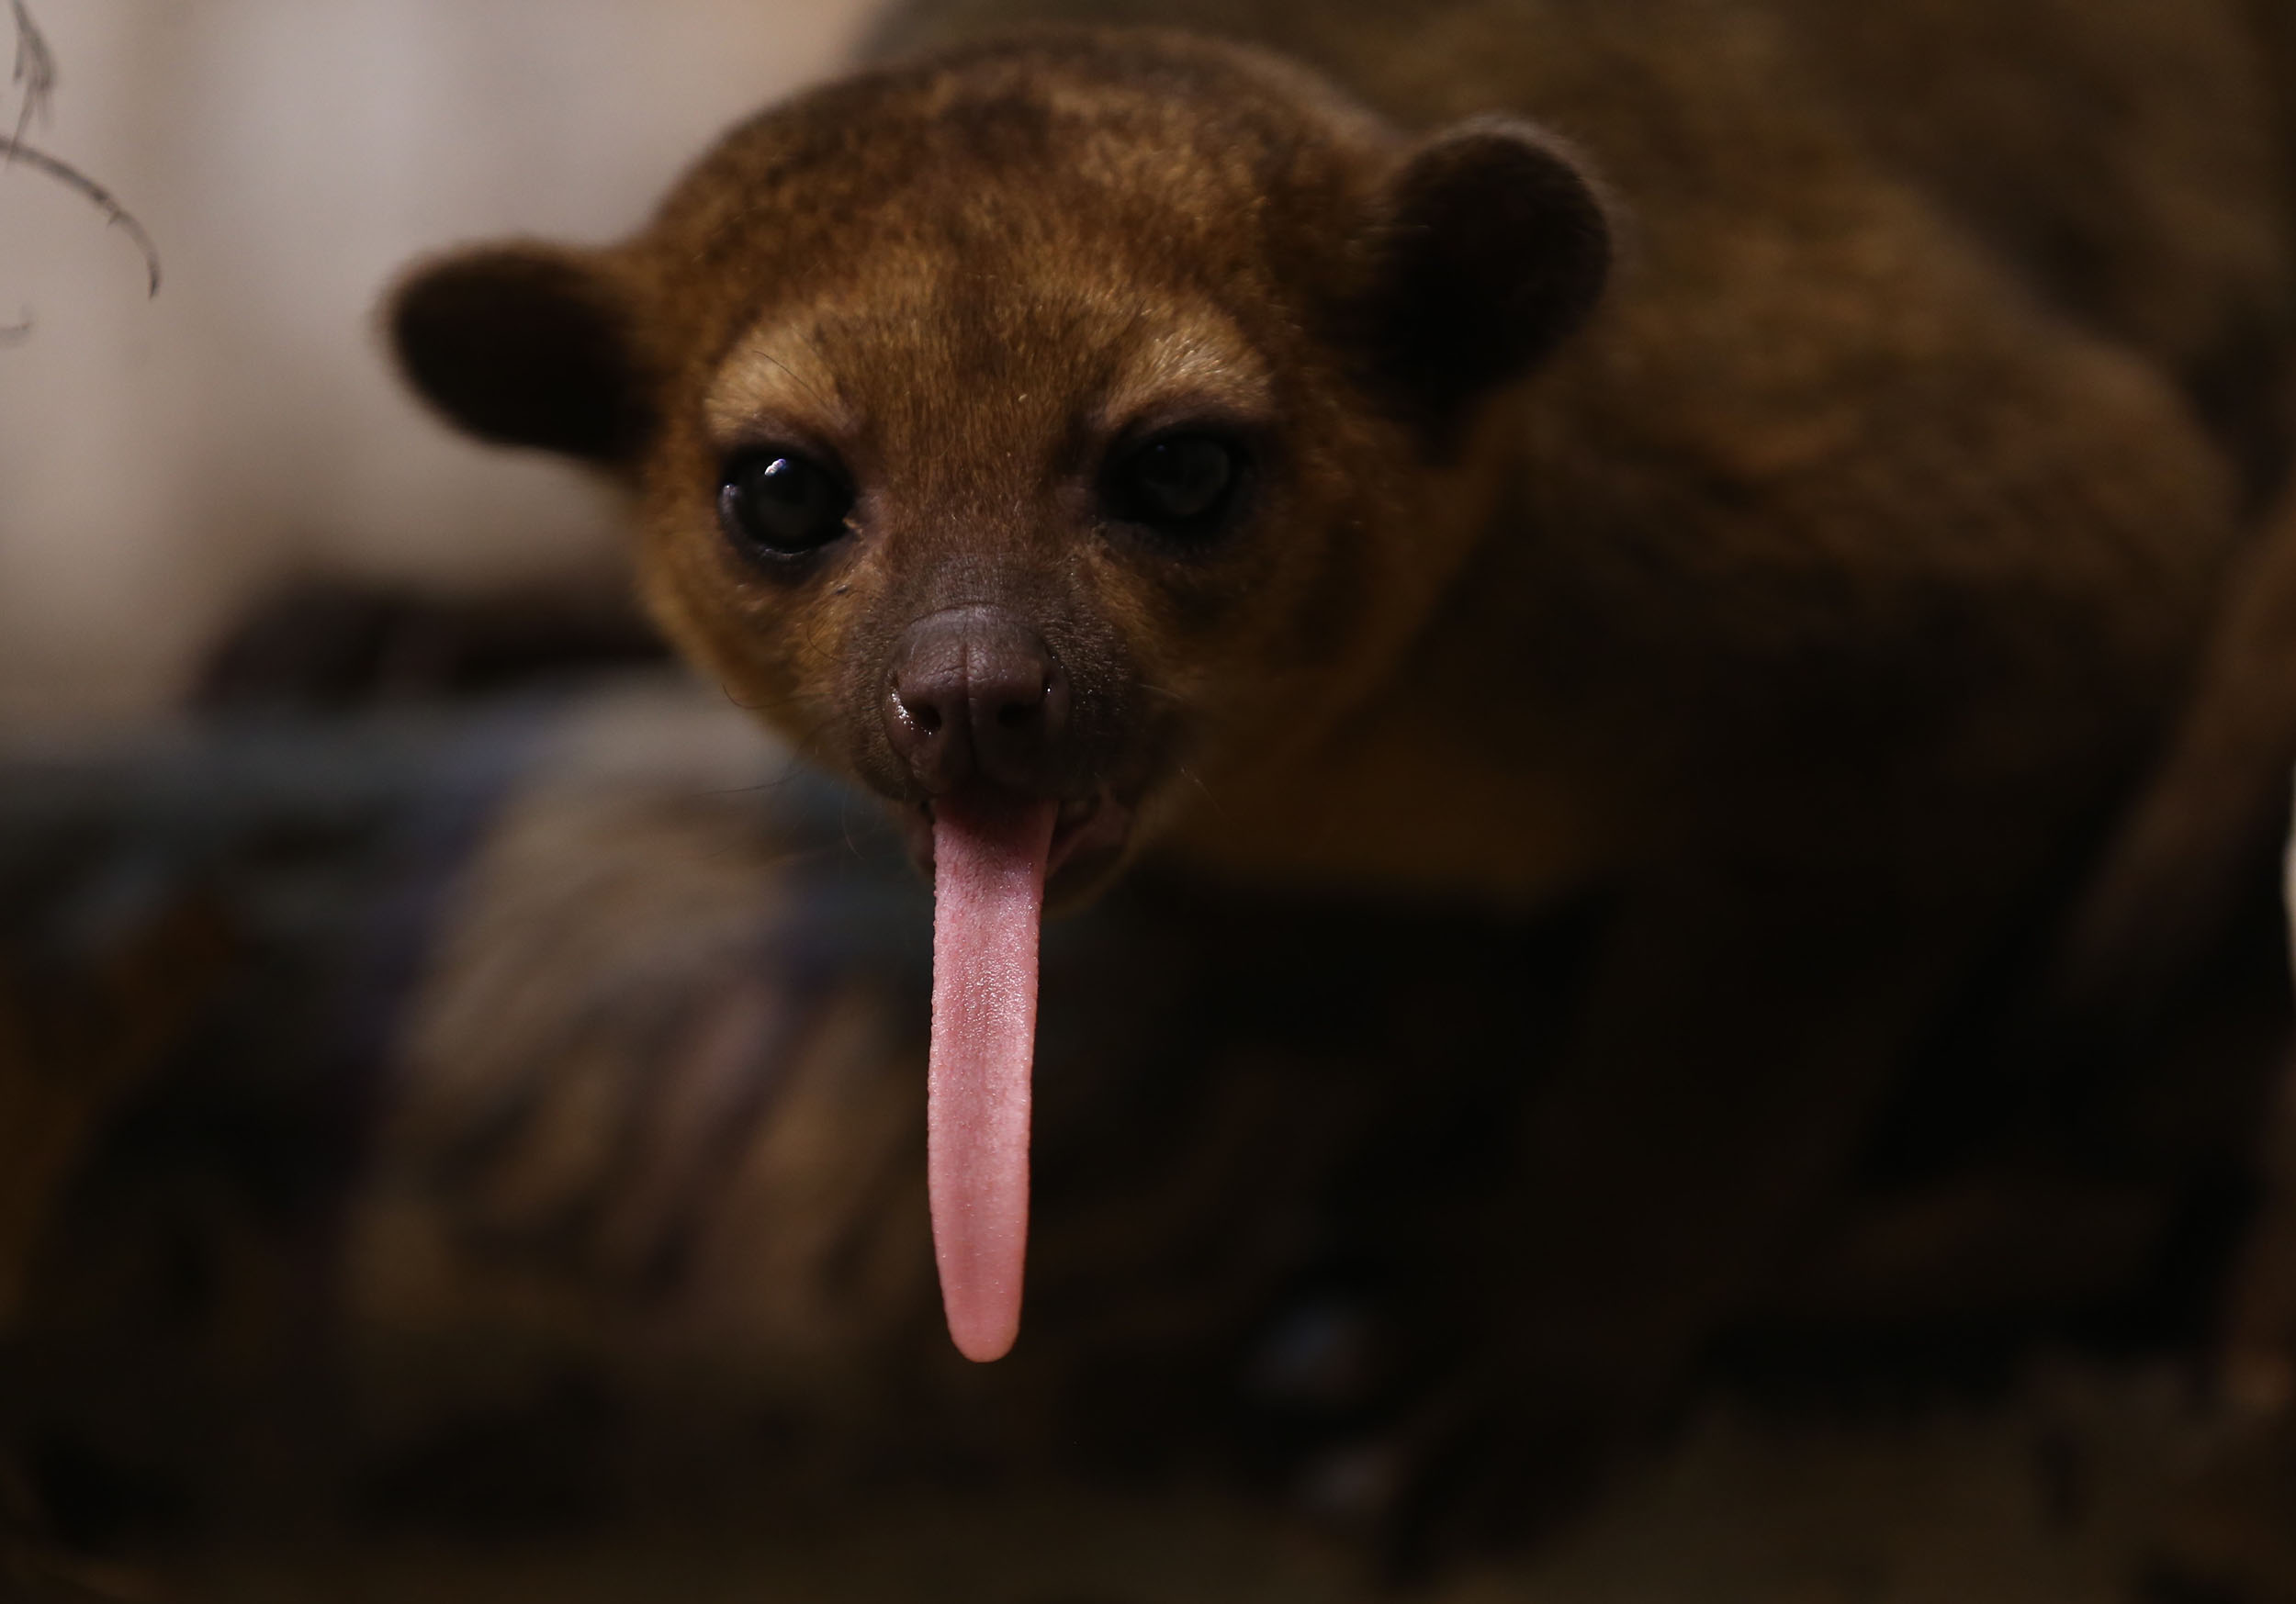 Cute cuddly looking kinkajou sticks out a long pink tongue as it looks into the camera